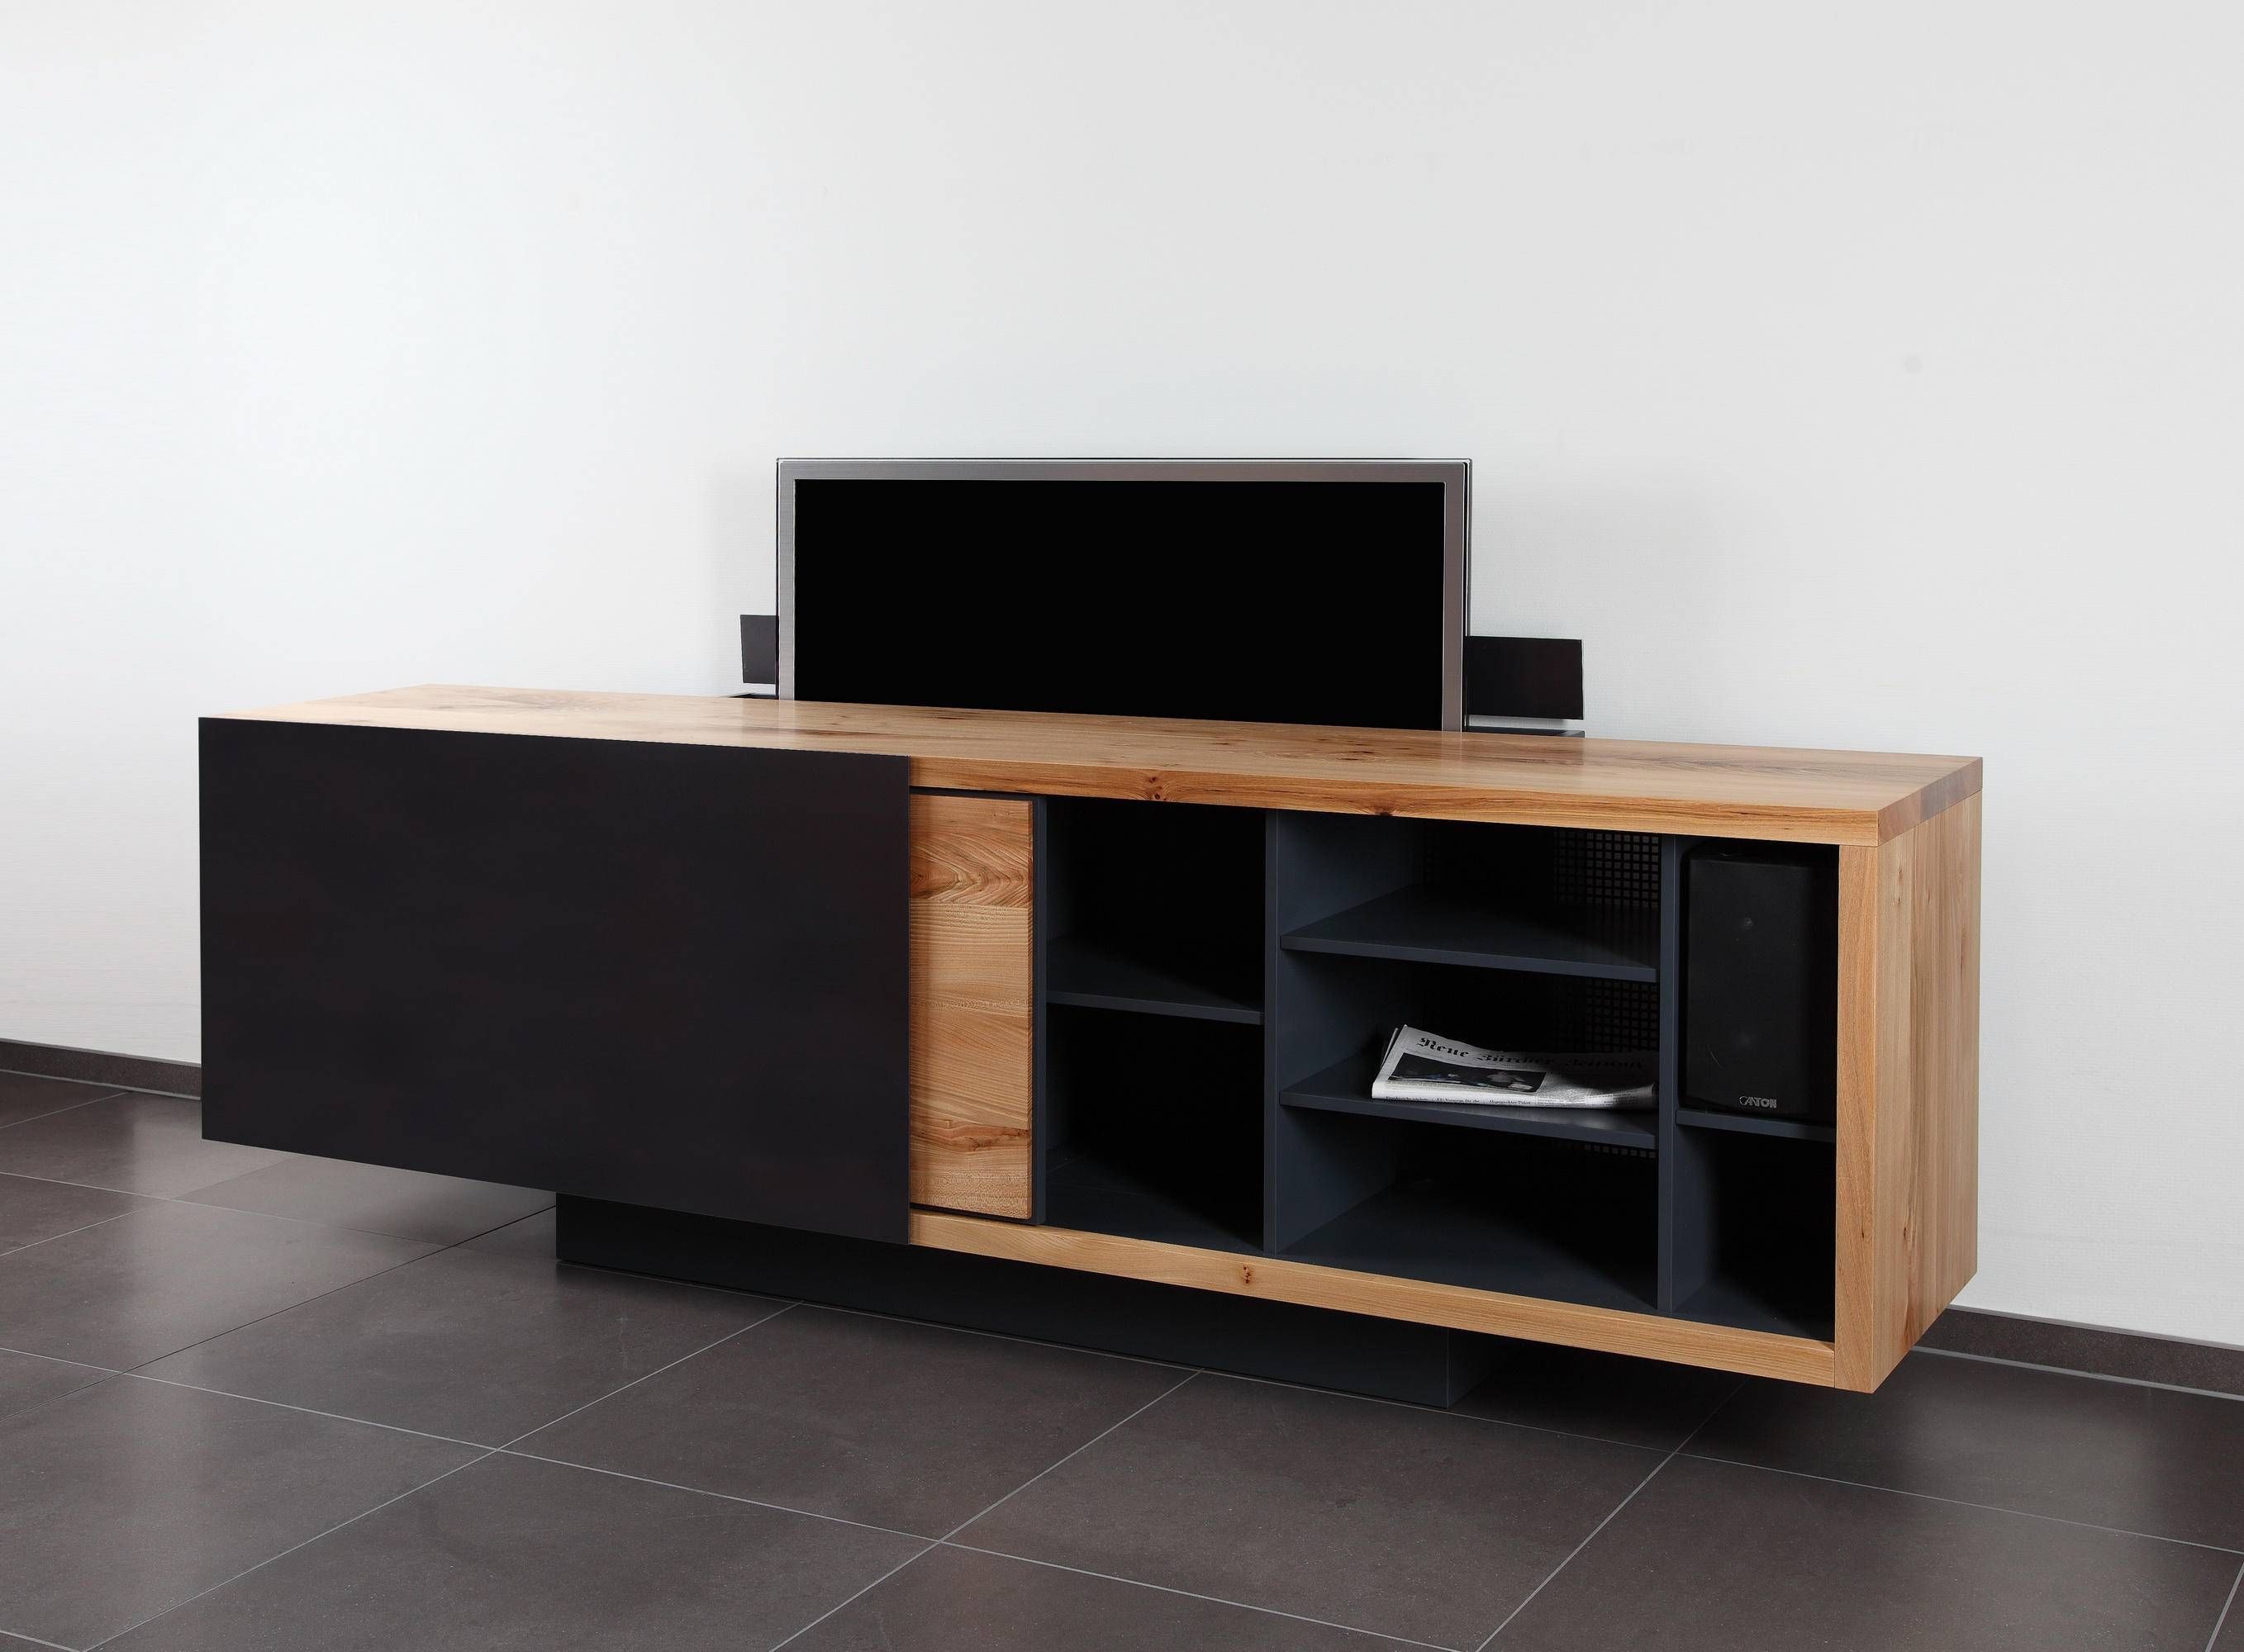 Ign. B2. Tv. Sideboard. – Multimedia Sideboards From Ign (View 9 of 20)